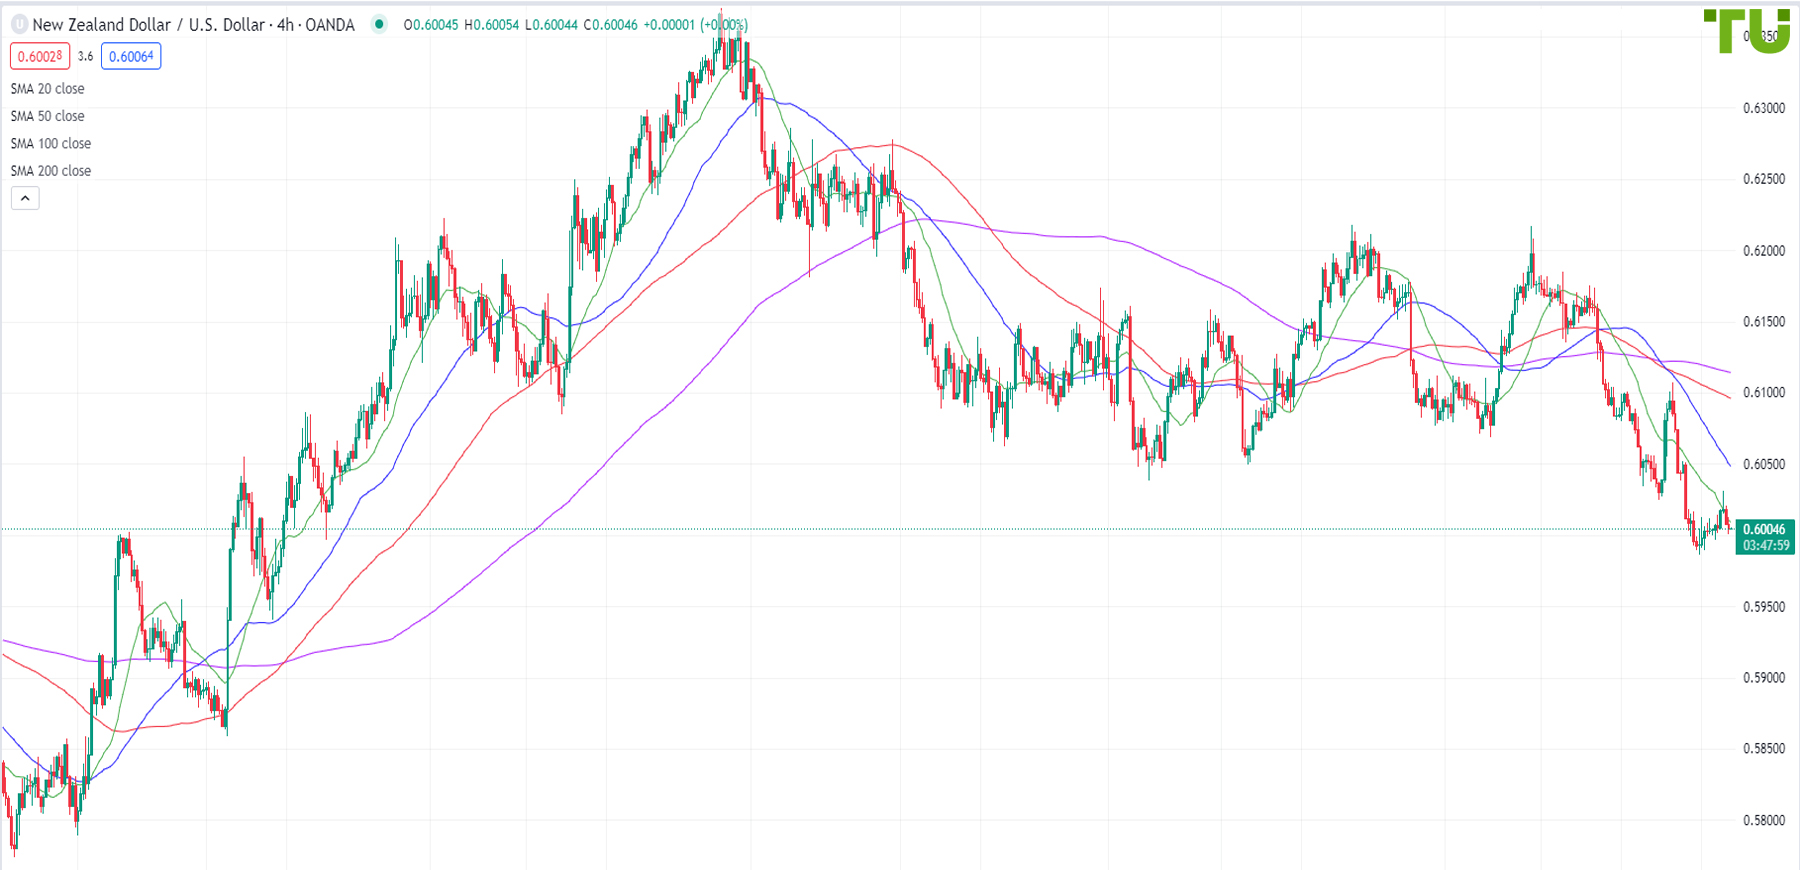 Kiwi/dollar also sold off on an upside pullback